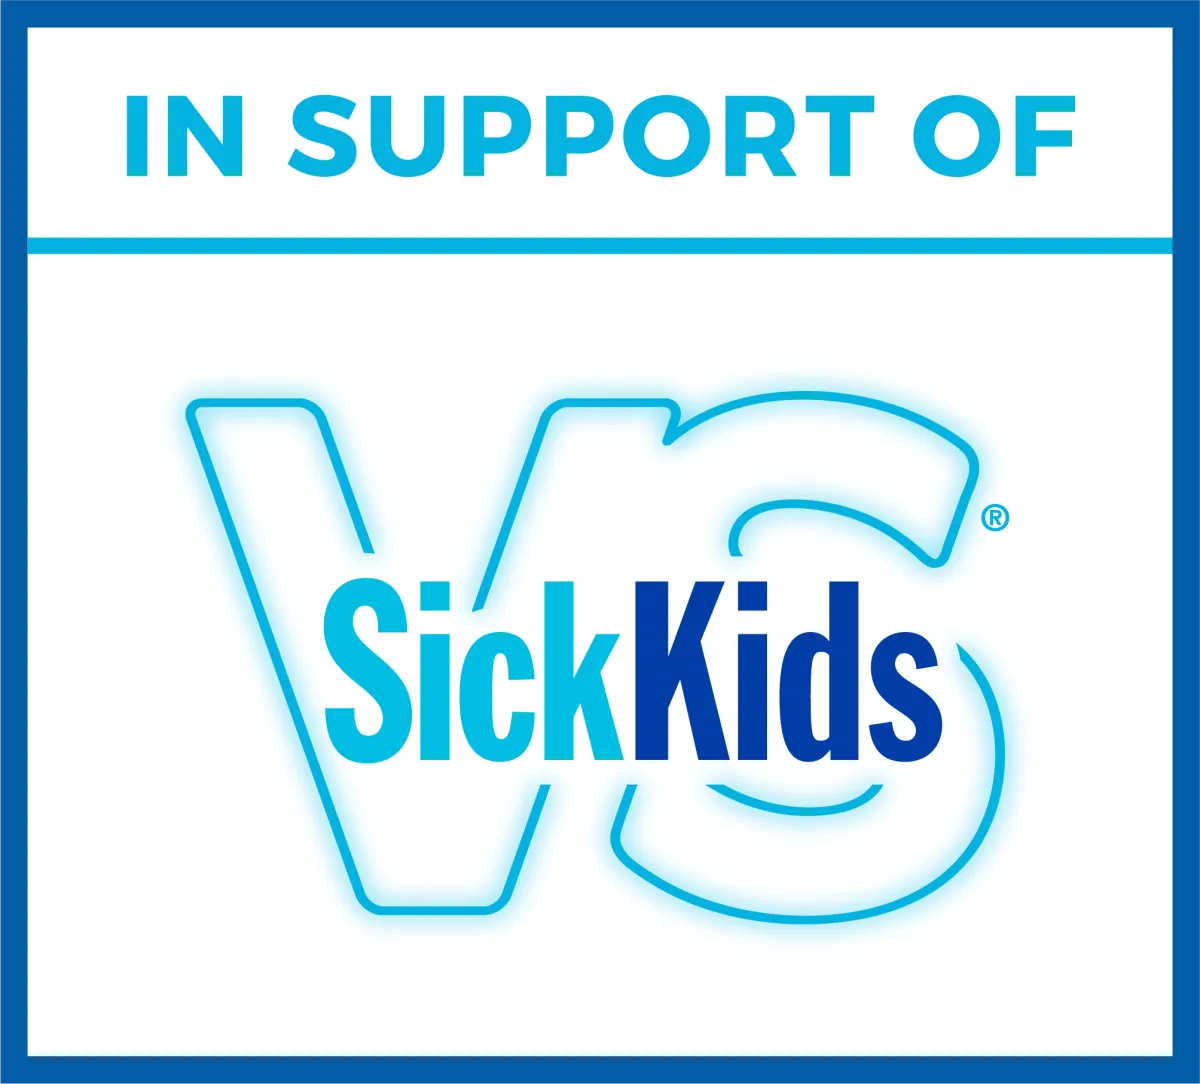 In support of Sick Kids